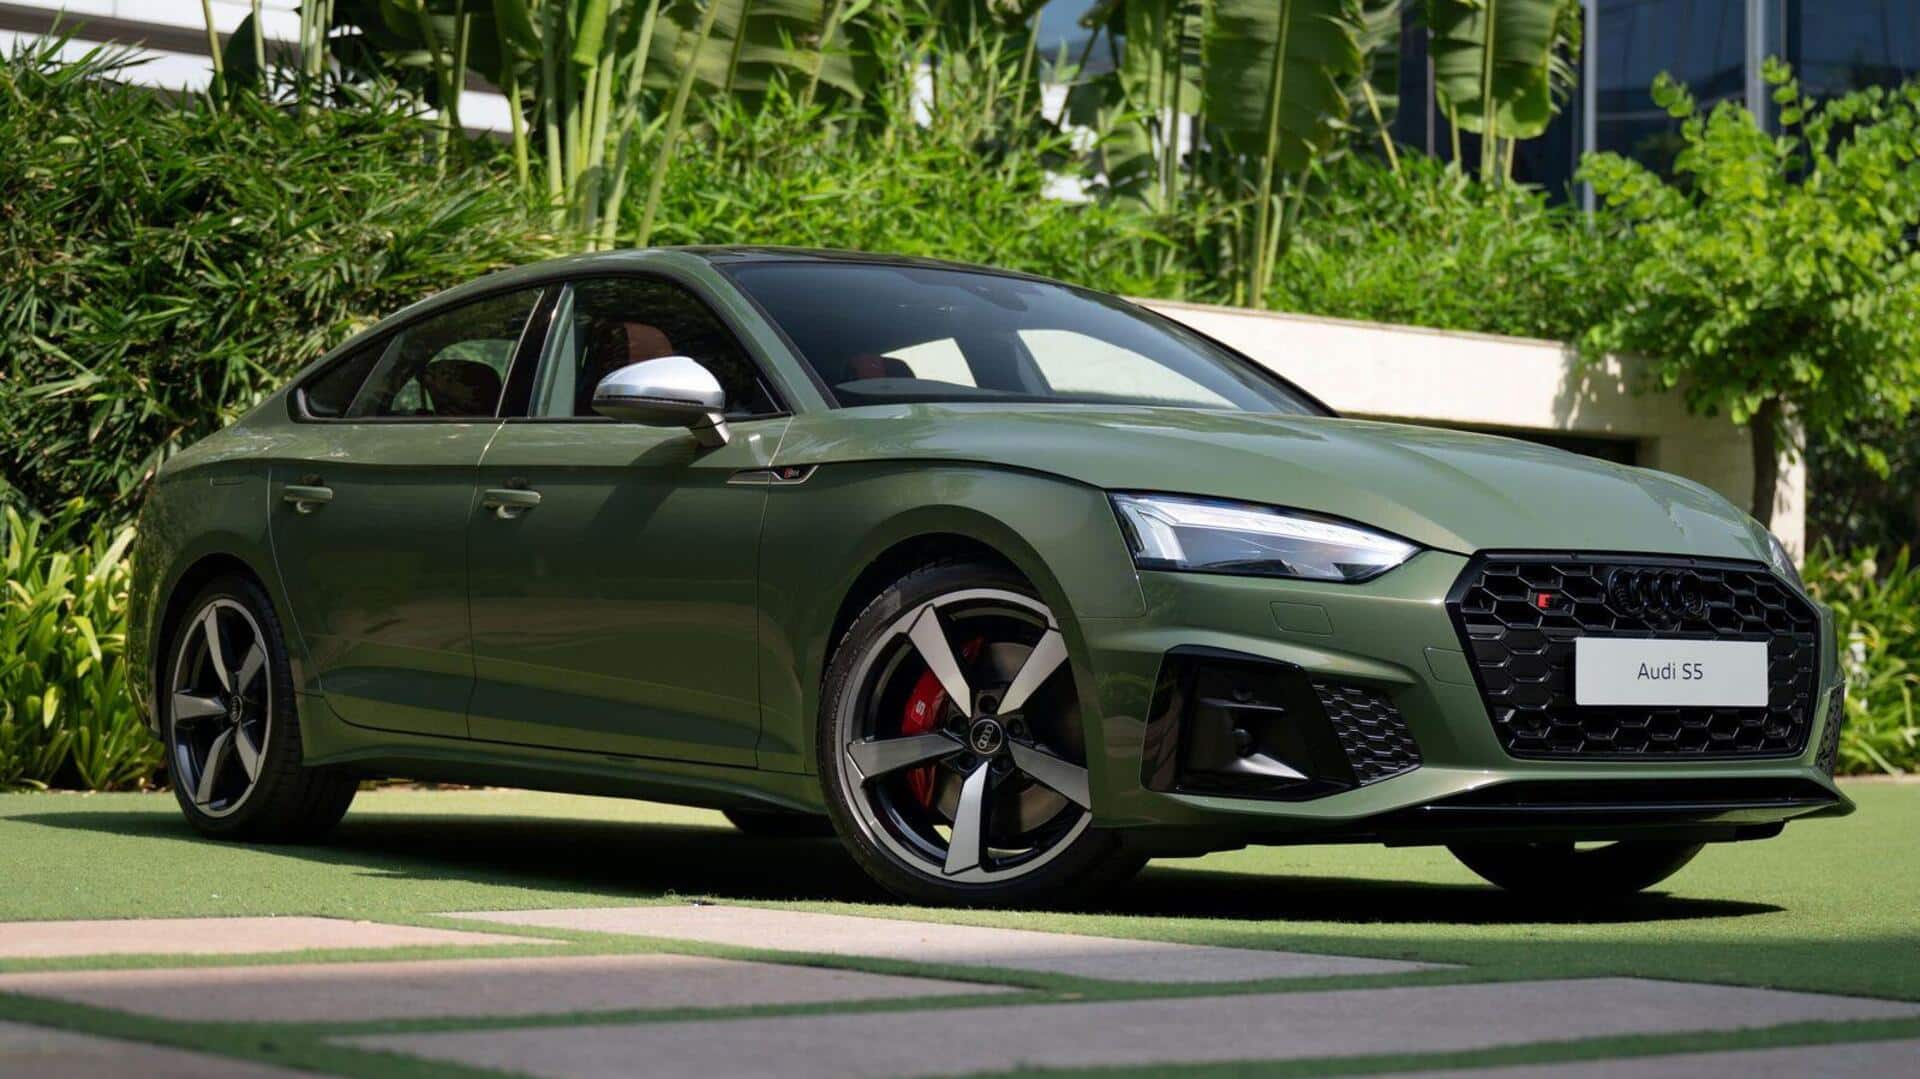 Audi S5 Sportback Platinum Edition launched at Rs. 81.6 lakh